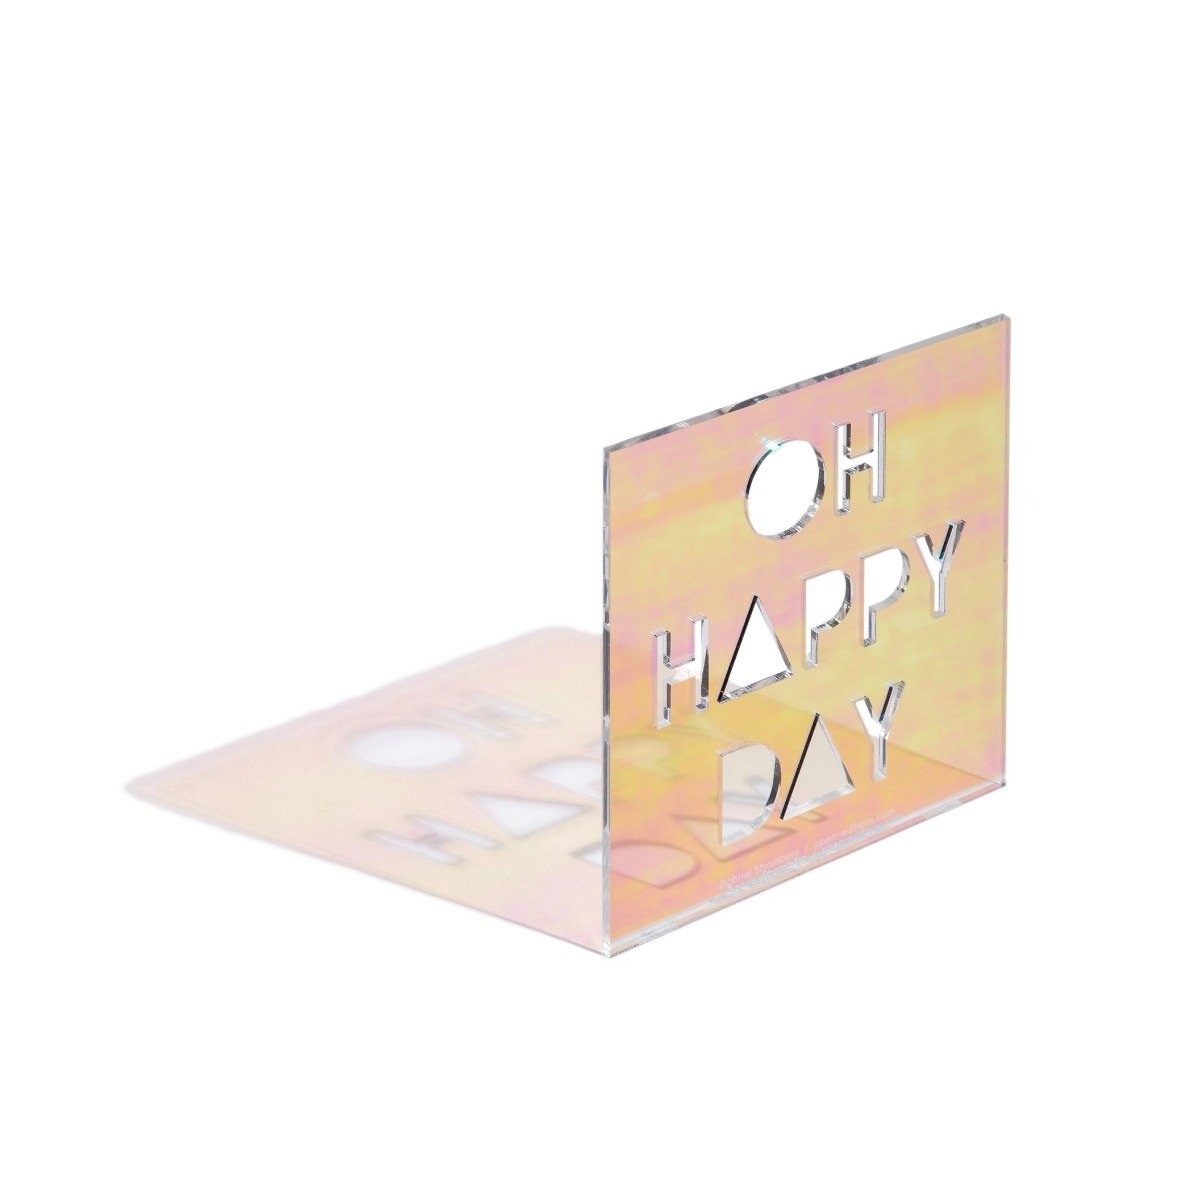 The Oh Happy Day Neon Greeting Card on display.